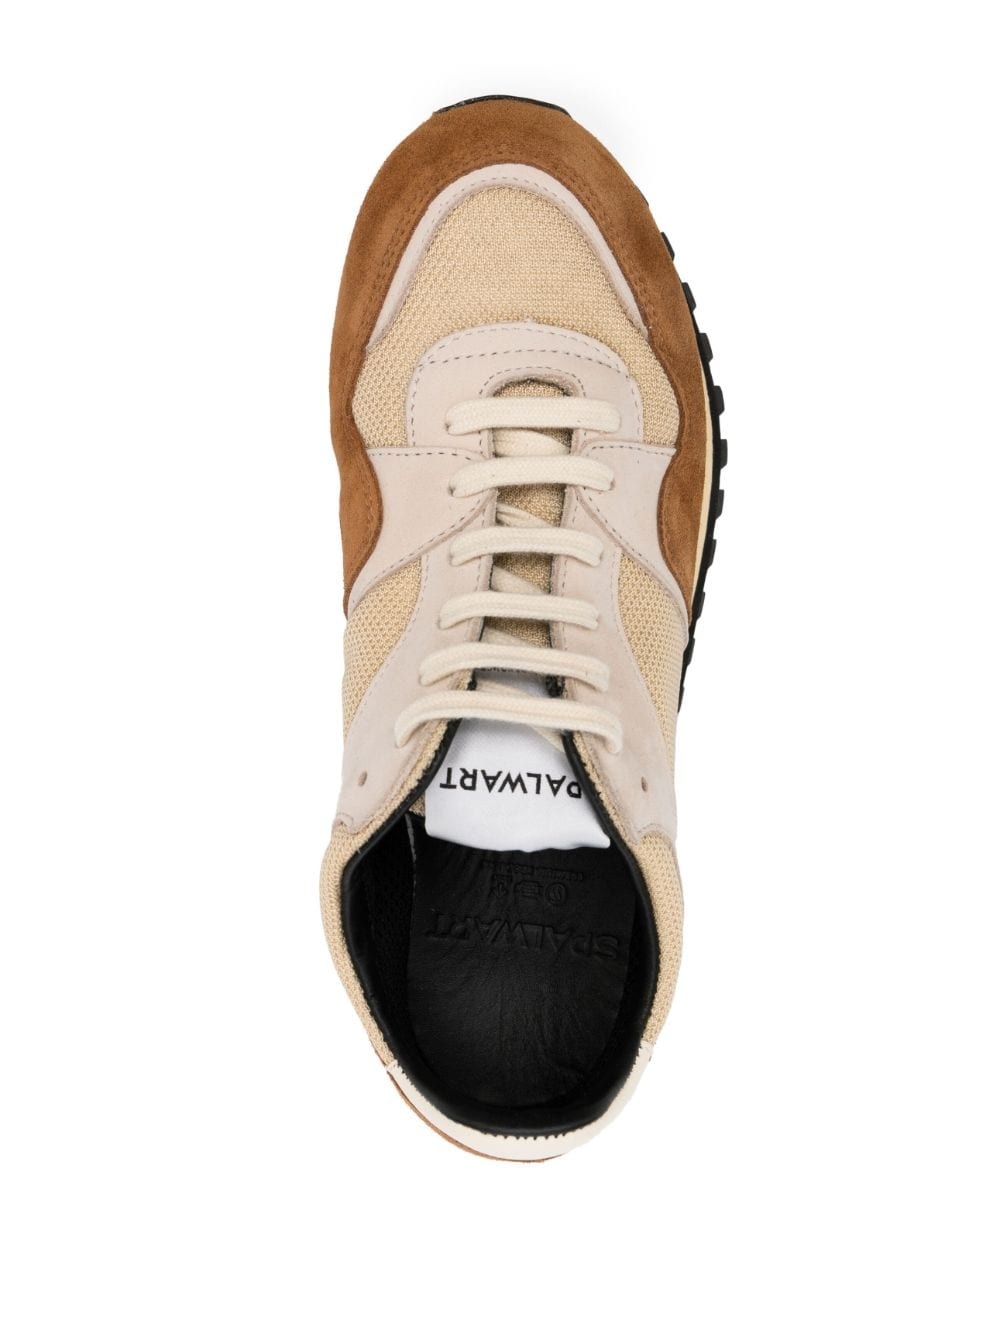 Spalwart low-top sneakers - White